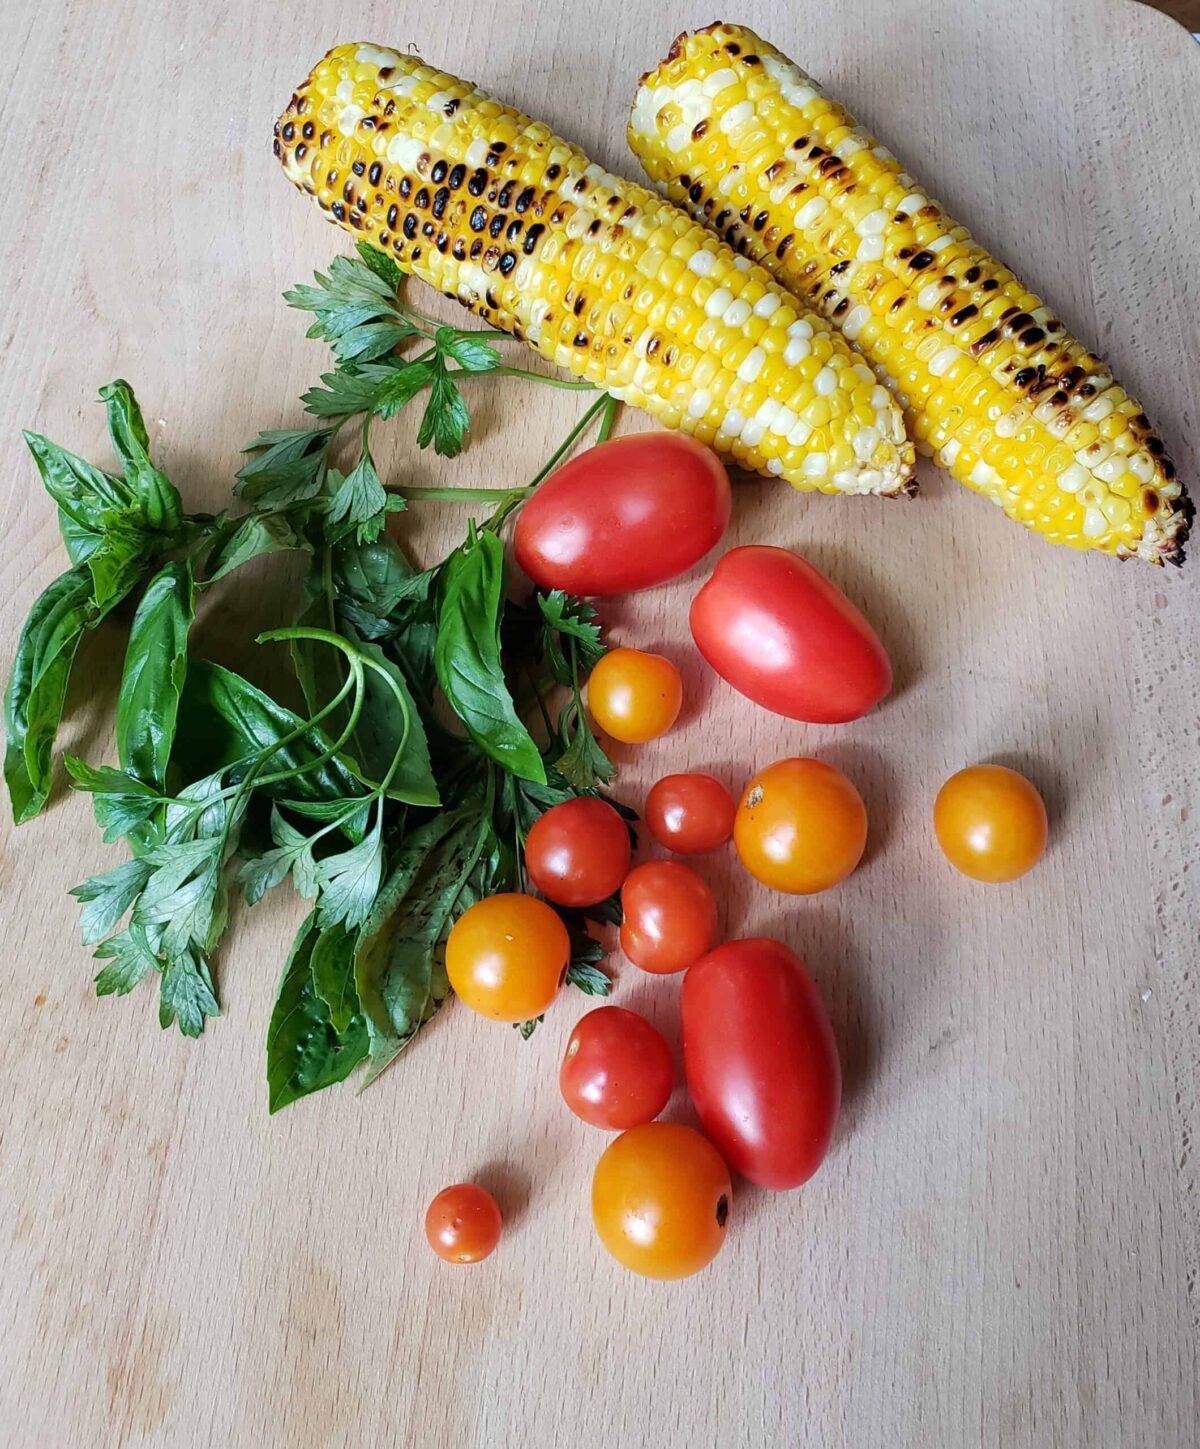 Roasted corn, red and yellow grape tomatoes, basil and parsley on wooden surface